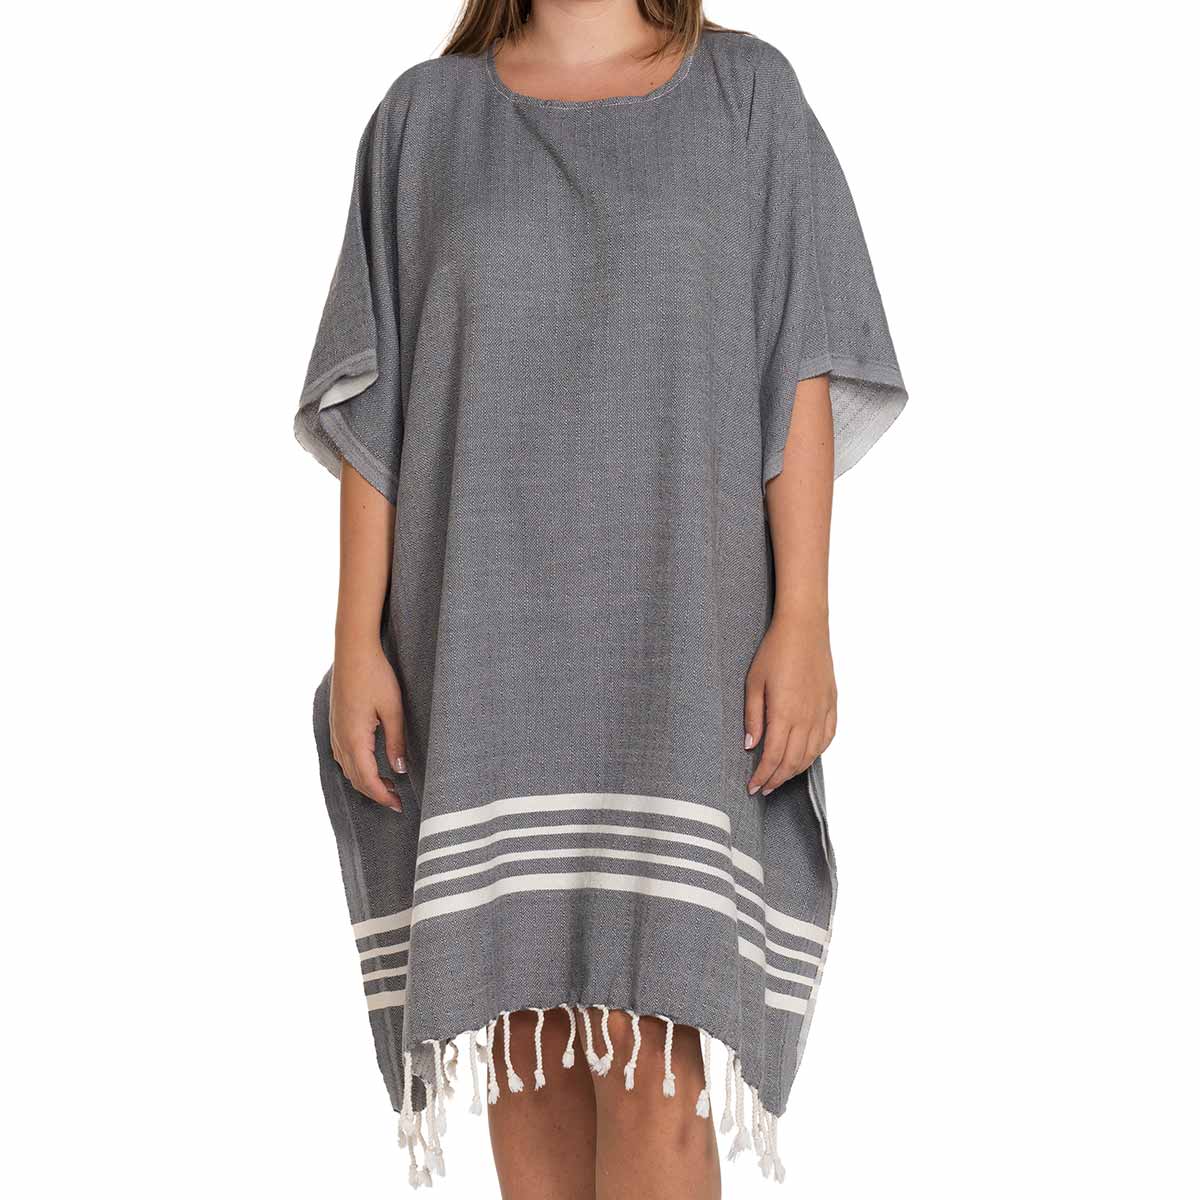 Cotton Beach Cover Up - Turkish Towels for Beach and Bath | Buldano.com